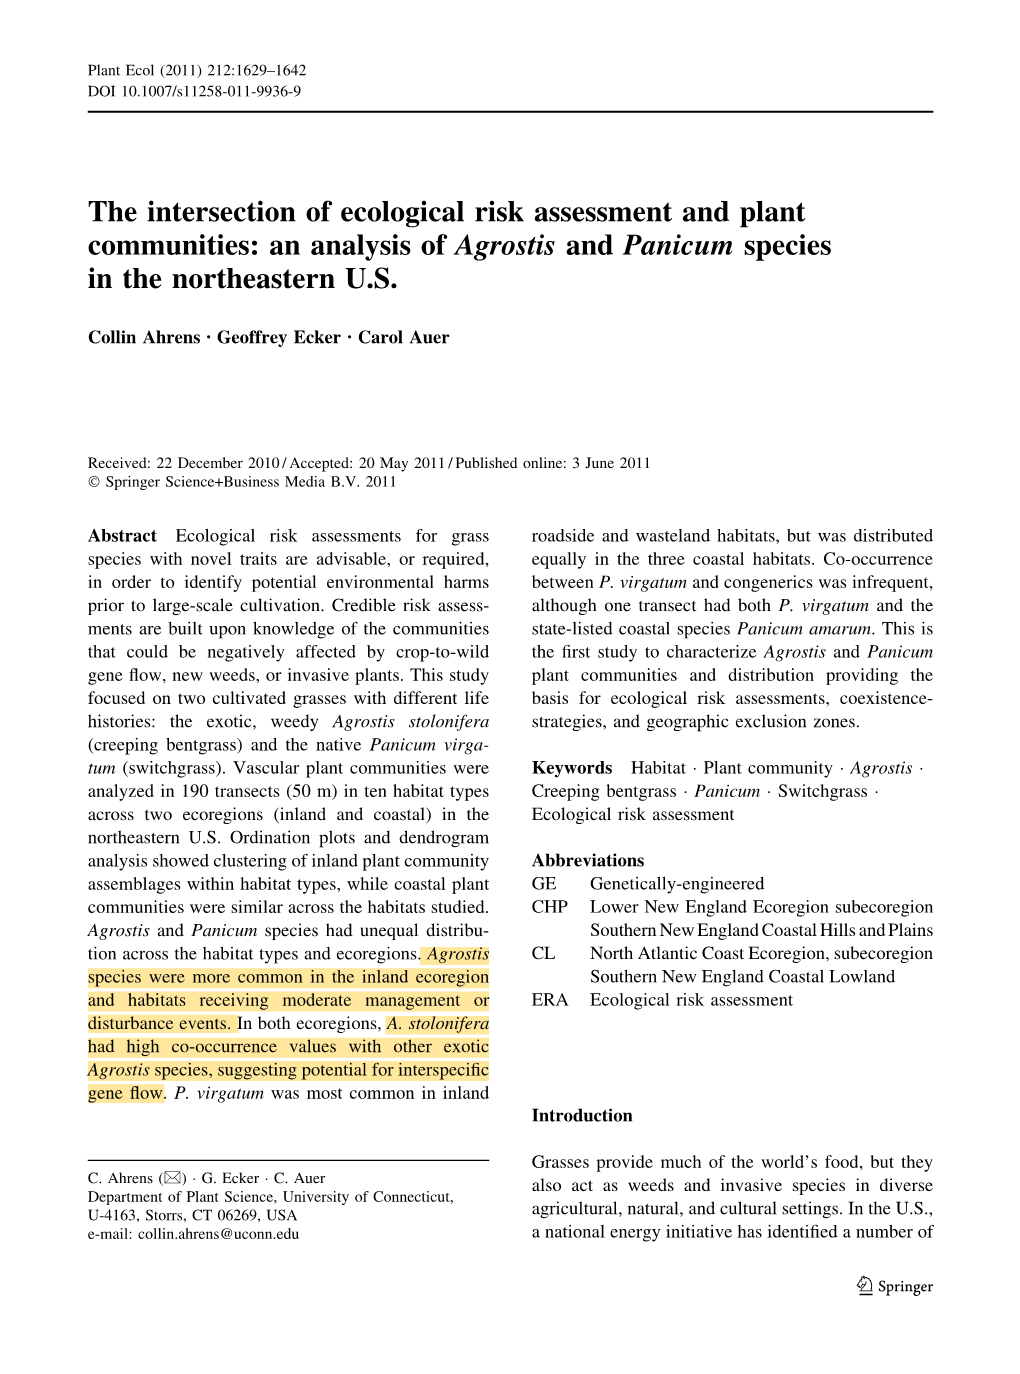 The Intersection of Ecological Risk Assessment and Plant Communities: an Analysis of Agrostis and Panicum Species in the Northeastern U.S